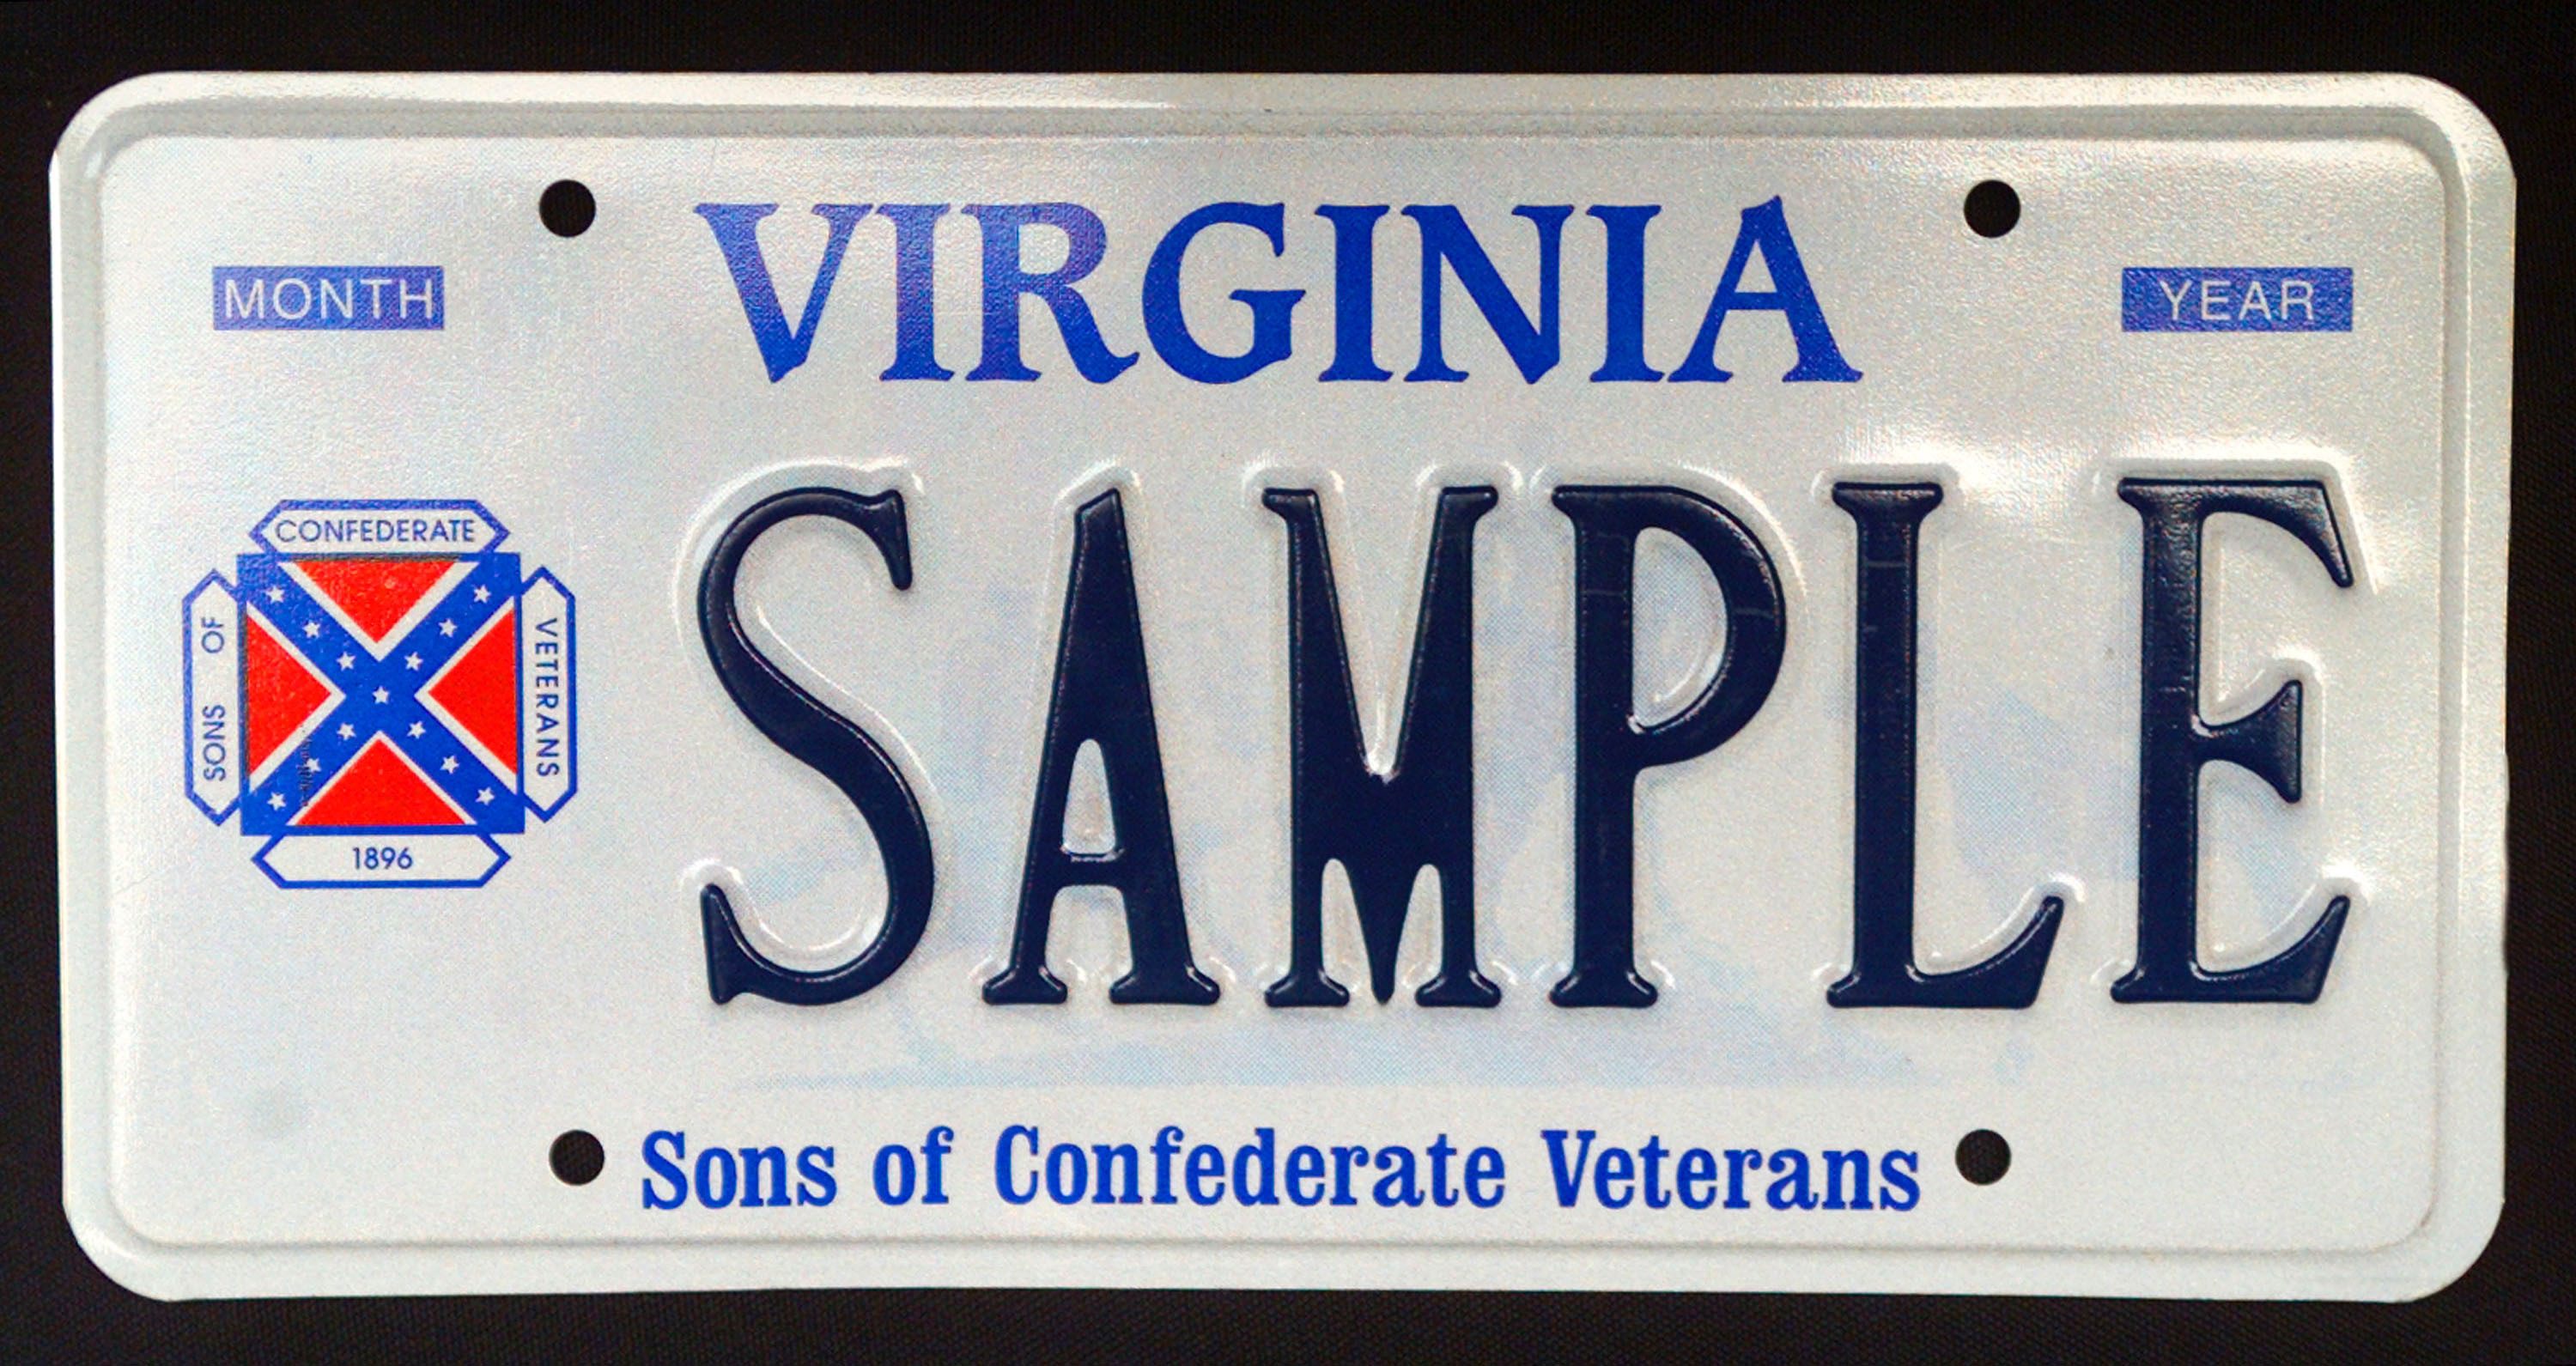 Virginia Recalling Specialty License Plates With Confederate Flag